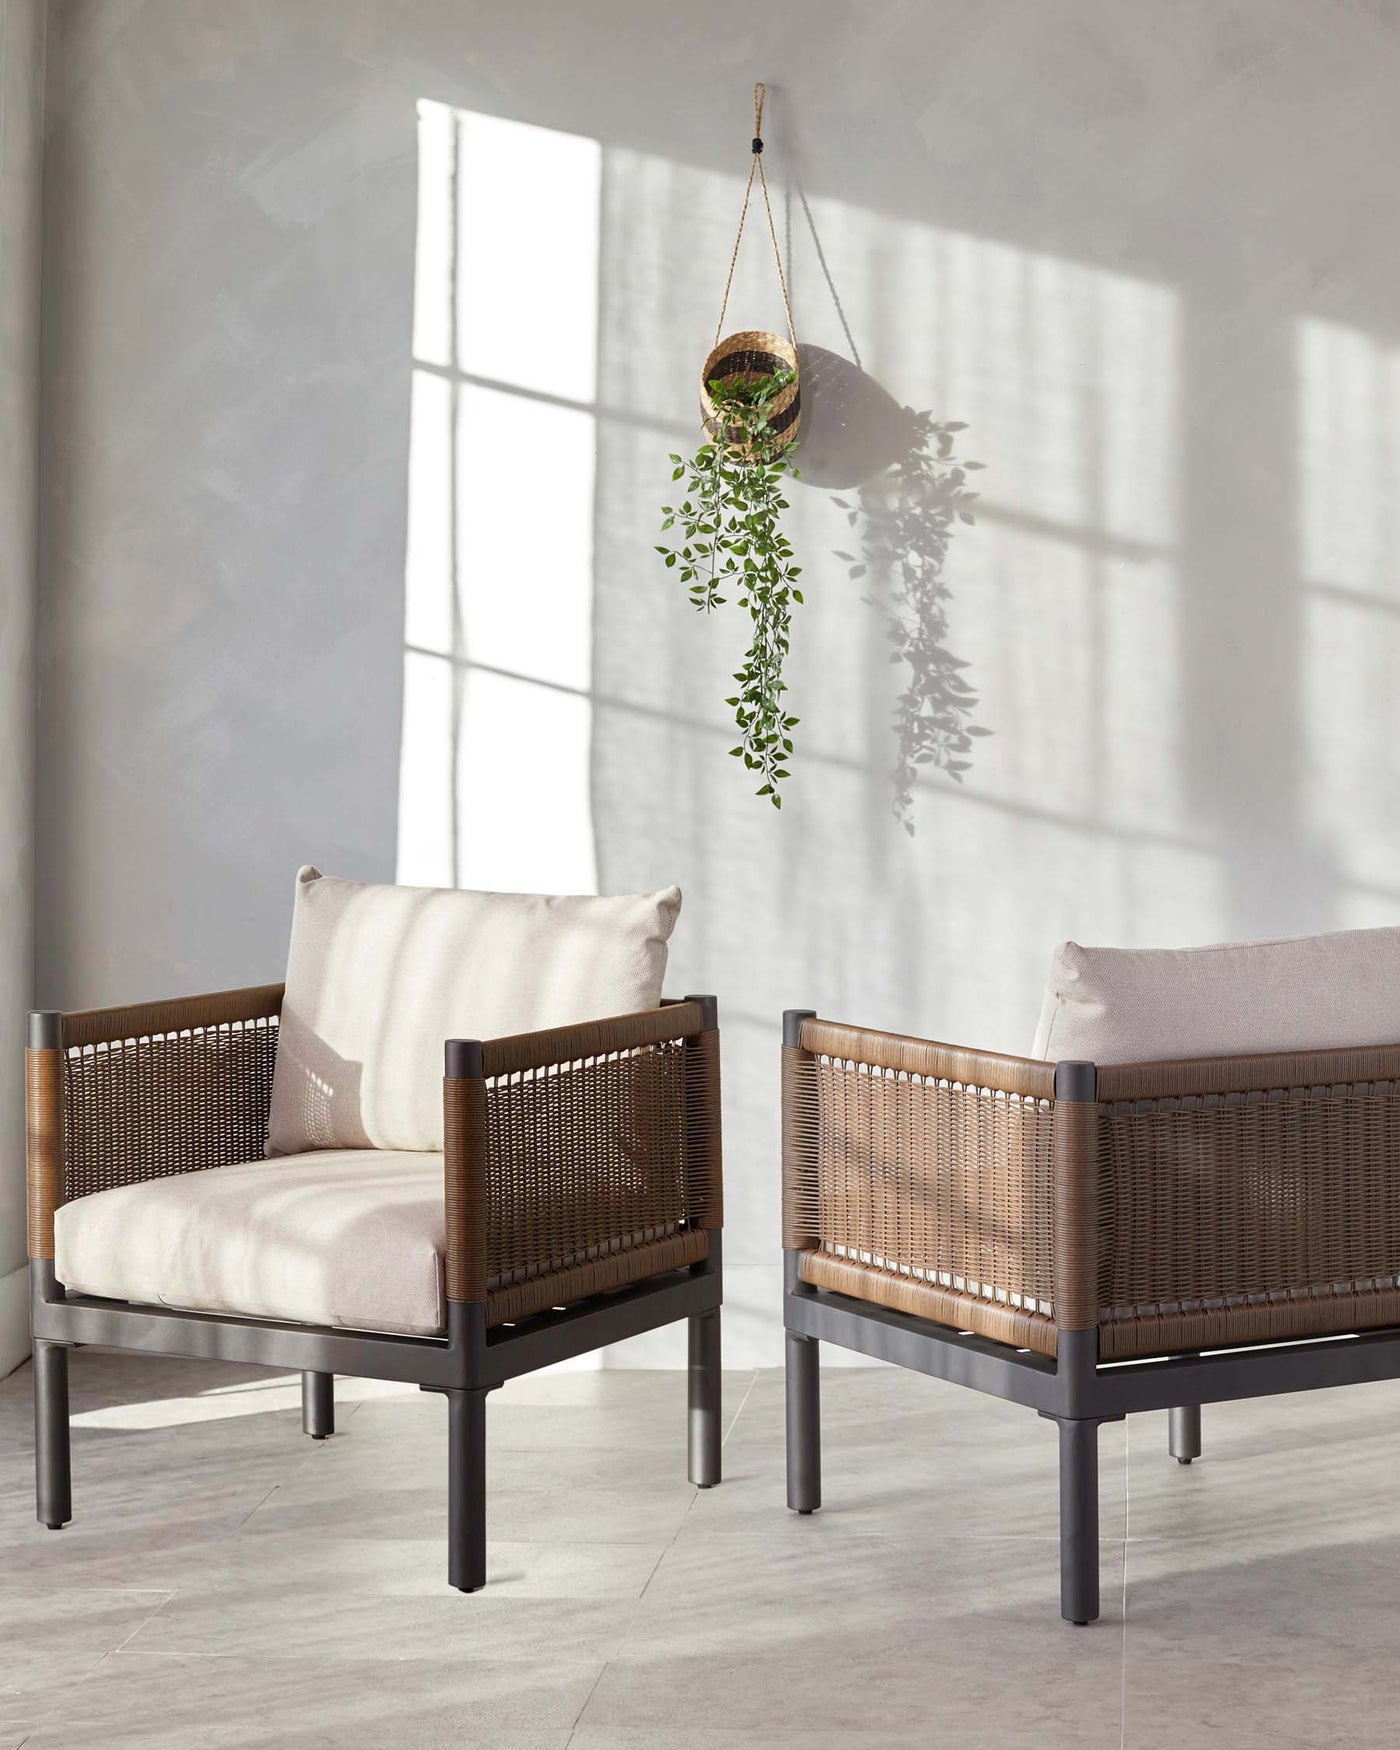 Two modern armchairs with dark wood frames and wicker backrests, complemented by light beige cushions on the seats and backs, positioned on a grey tiled floor with soft natural light filtering through a window.